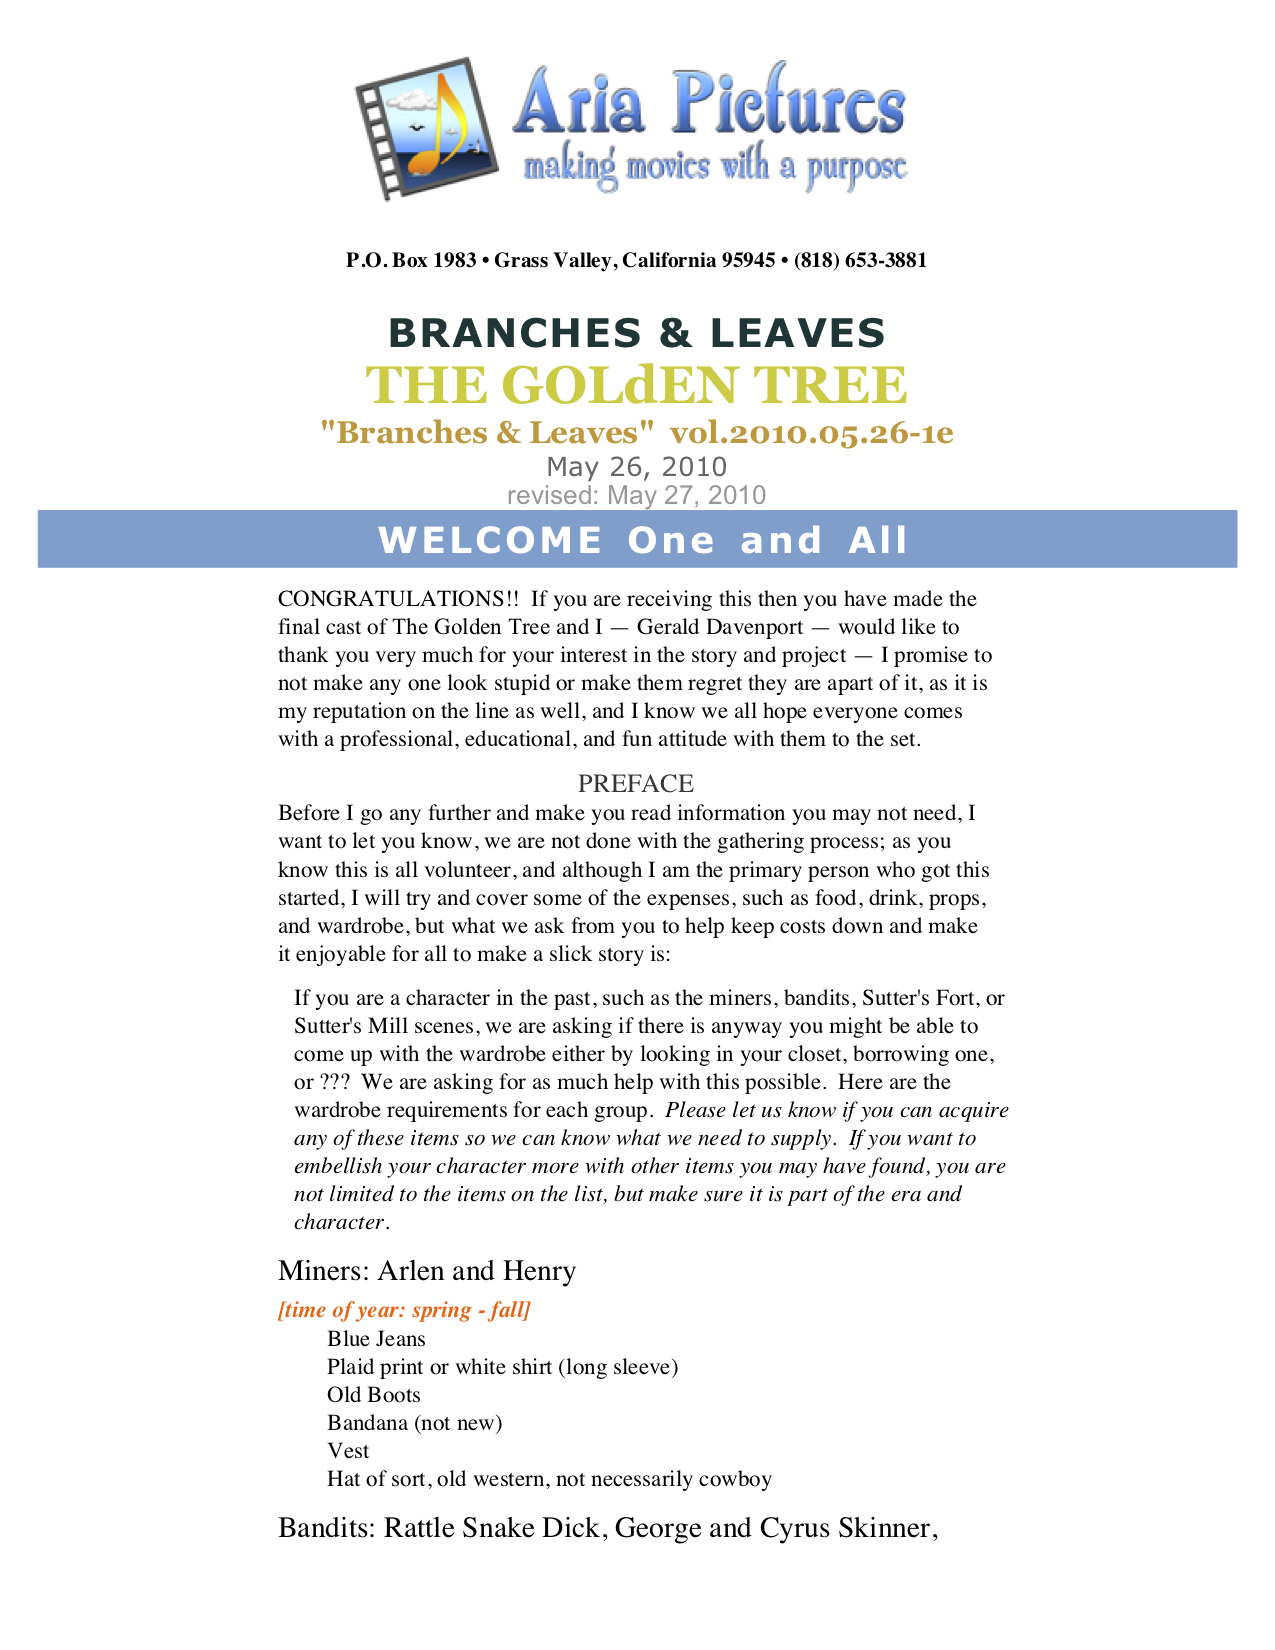 THE GOLdEN TREE (2010) introductory newsletter “Branches and Leaves”.